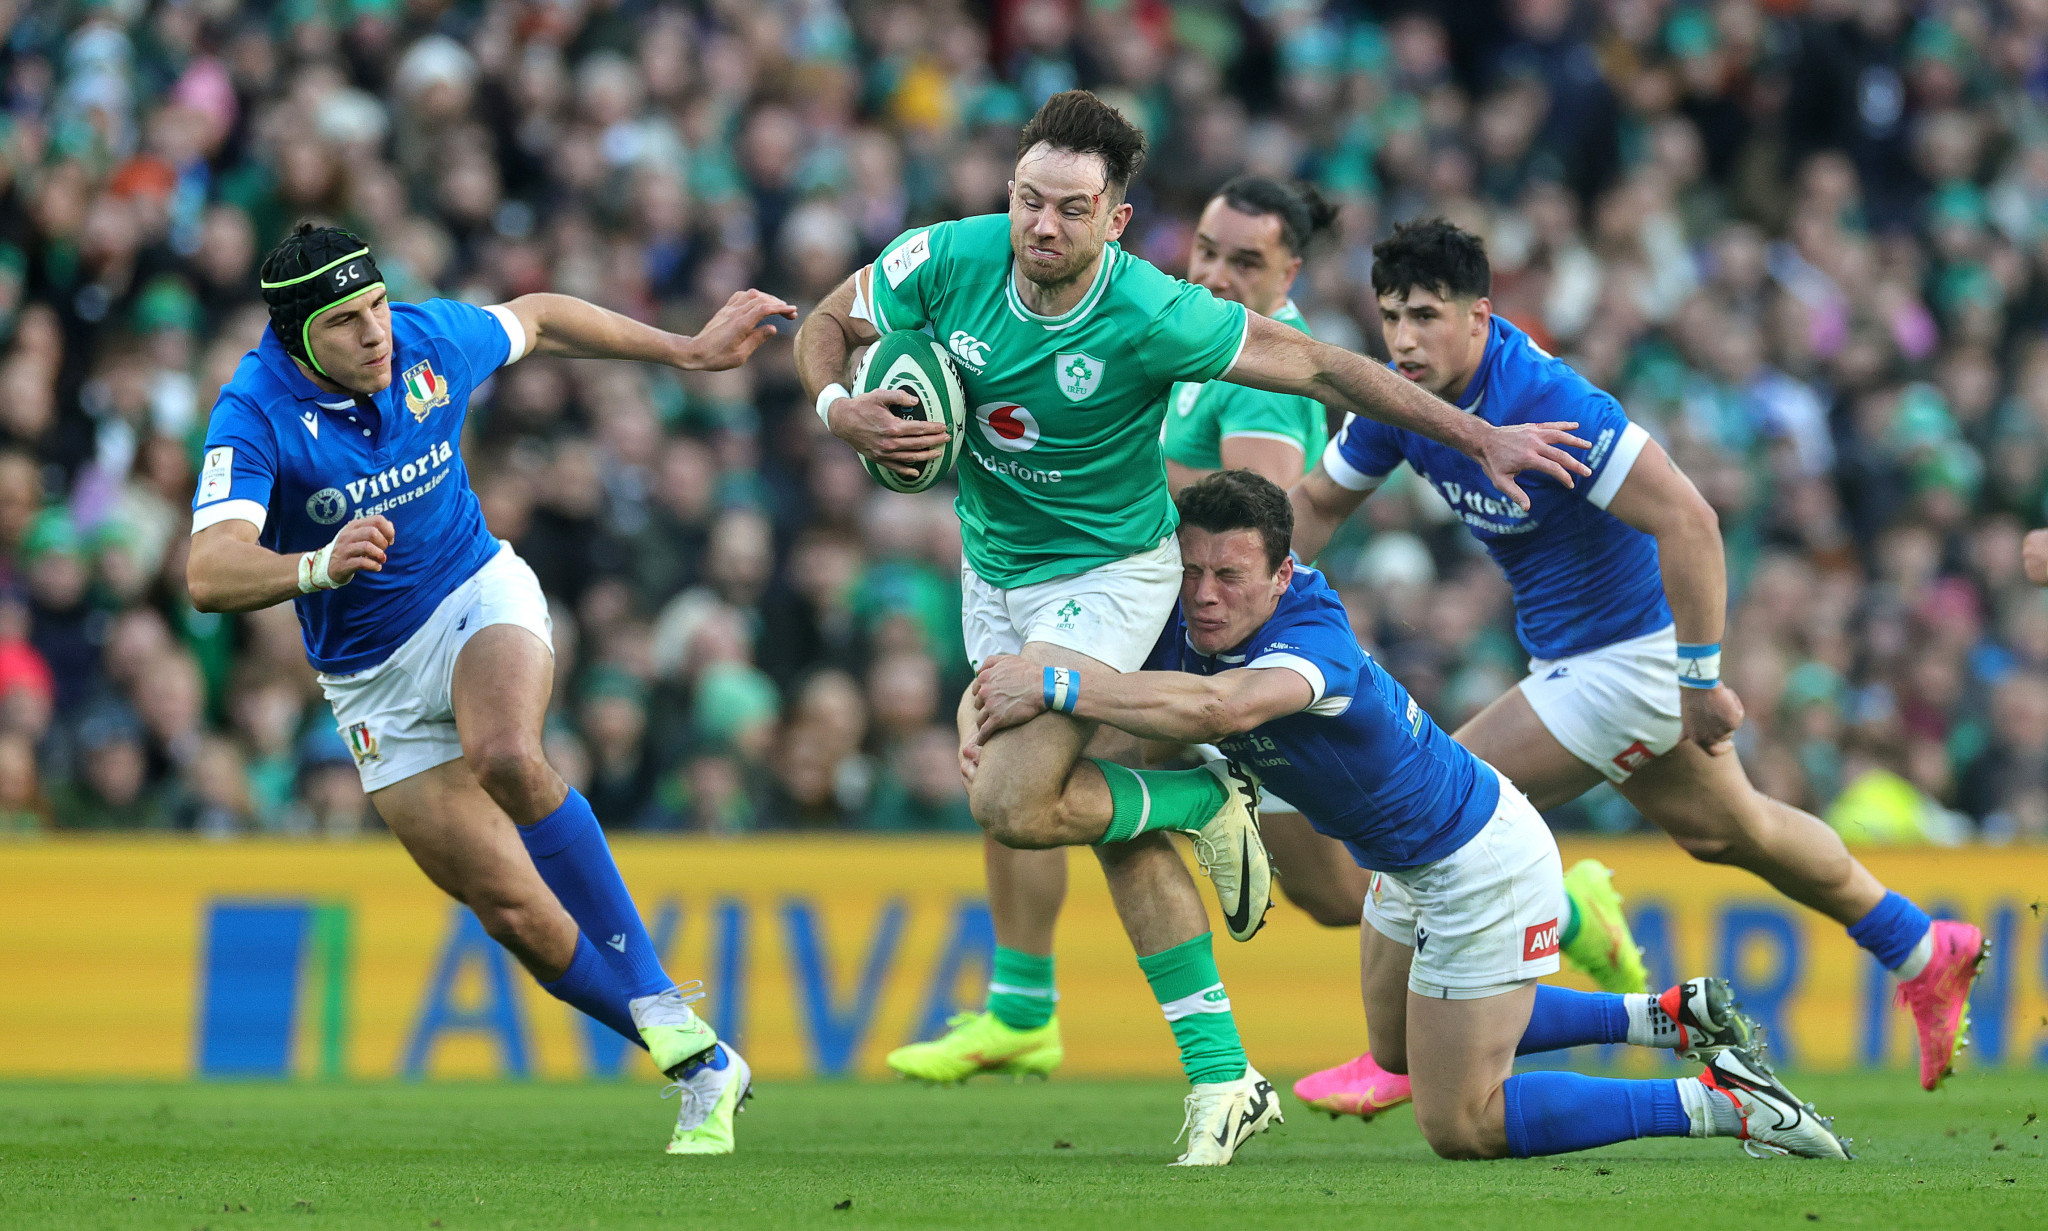 Ireland rugby ace Hugo Keenan will link up with his country for the sevens at the Paris 2024 Olympics. GETTY IMAGES